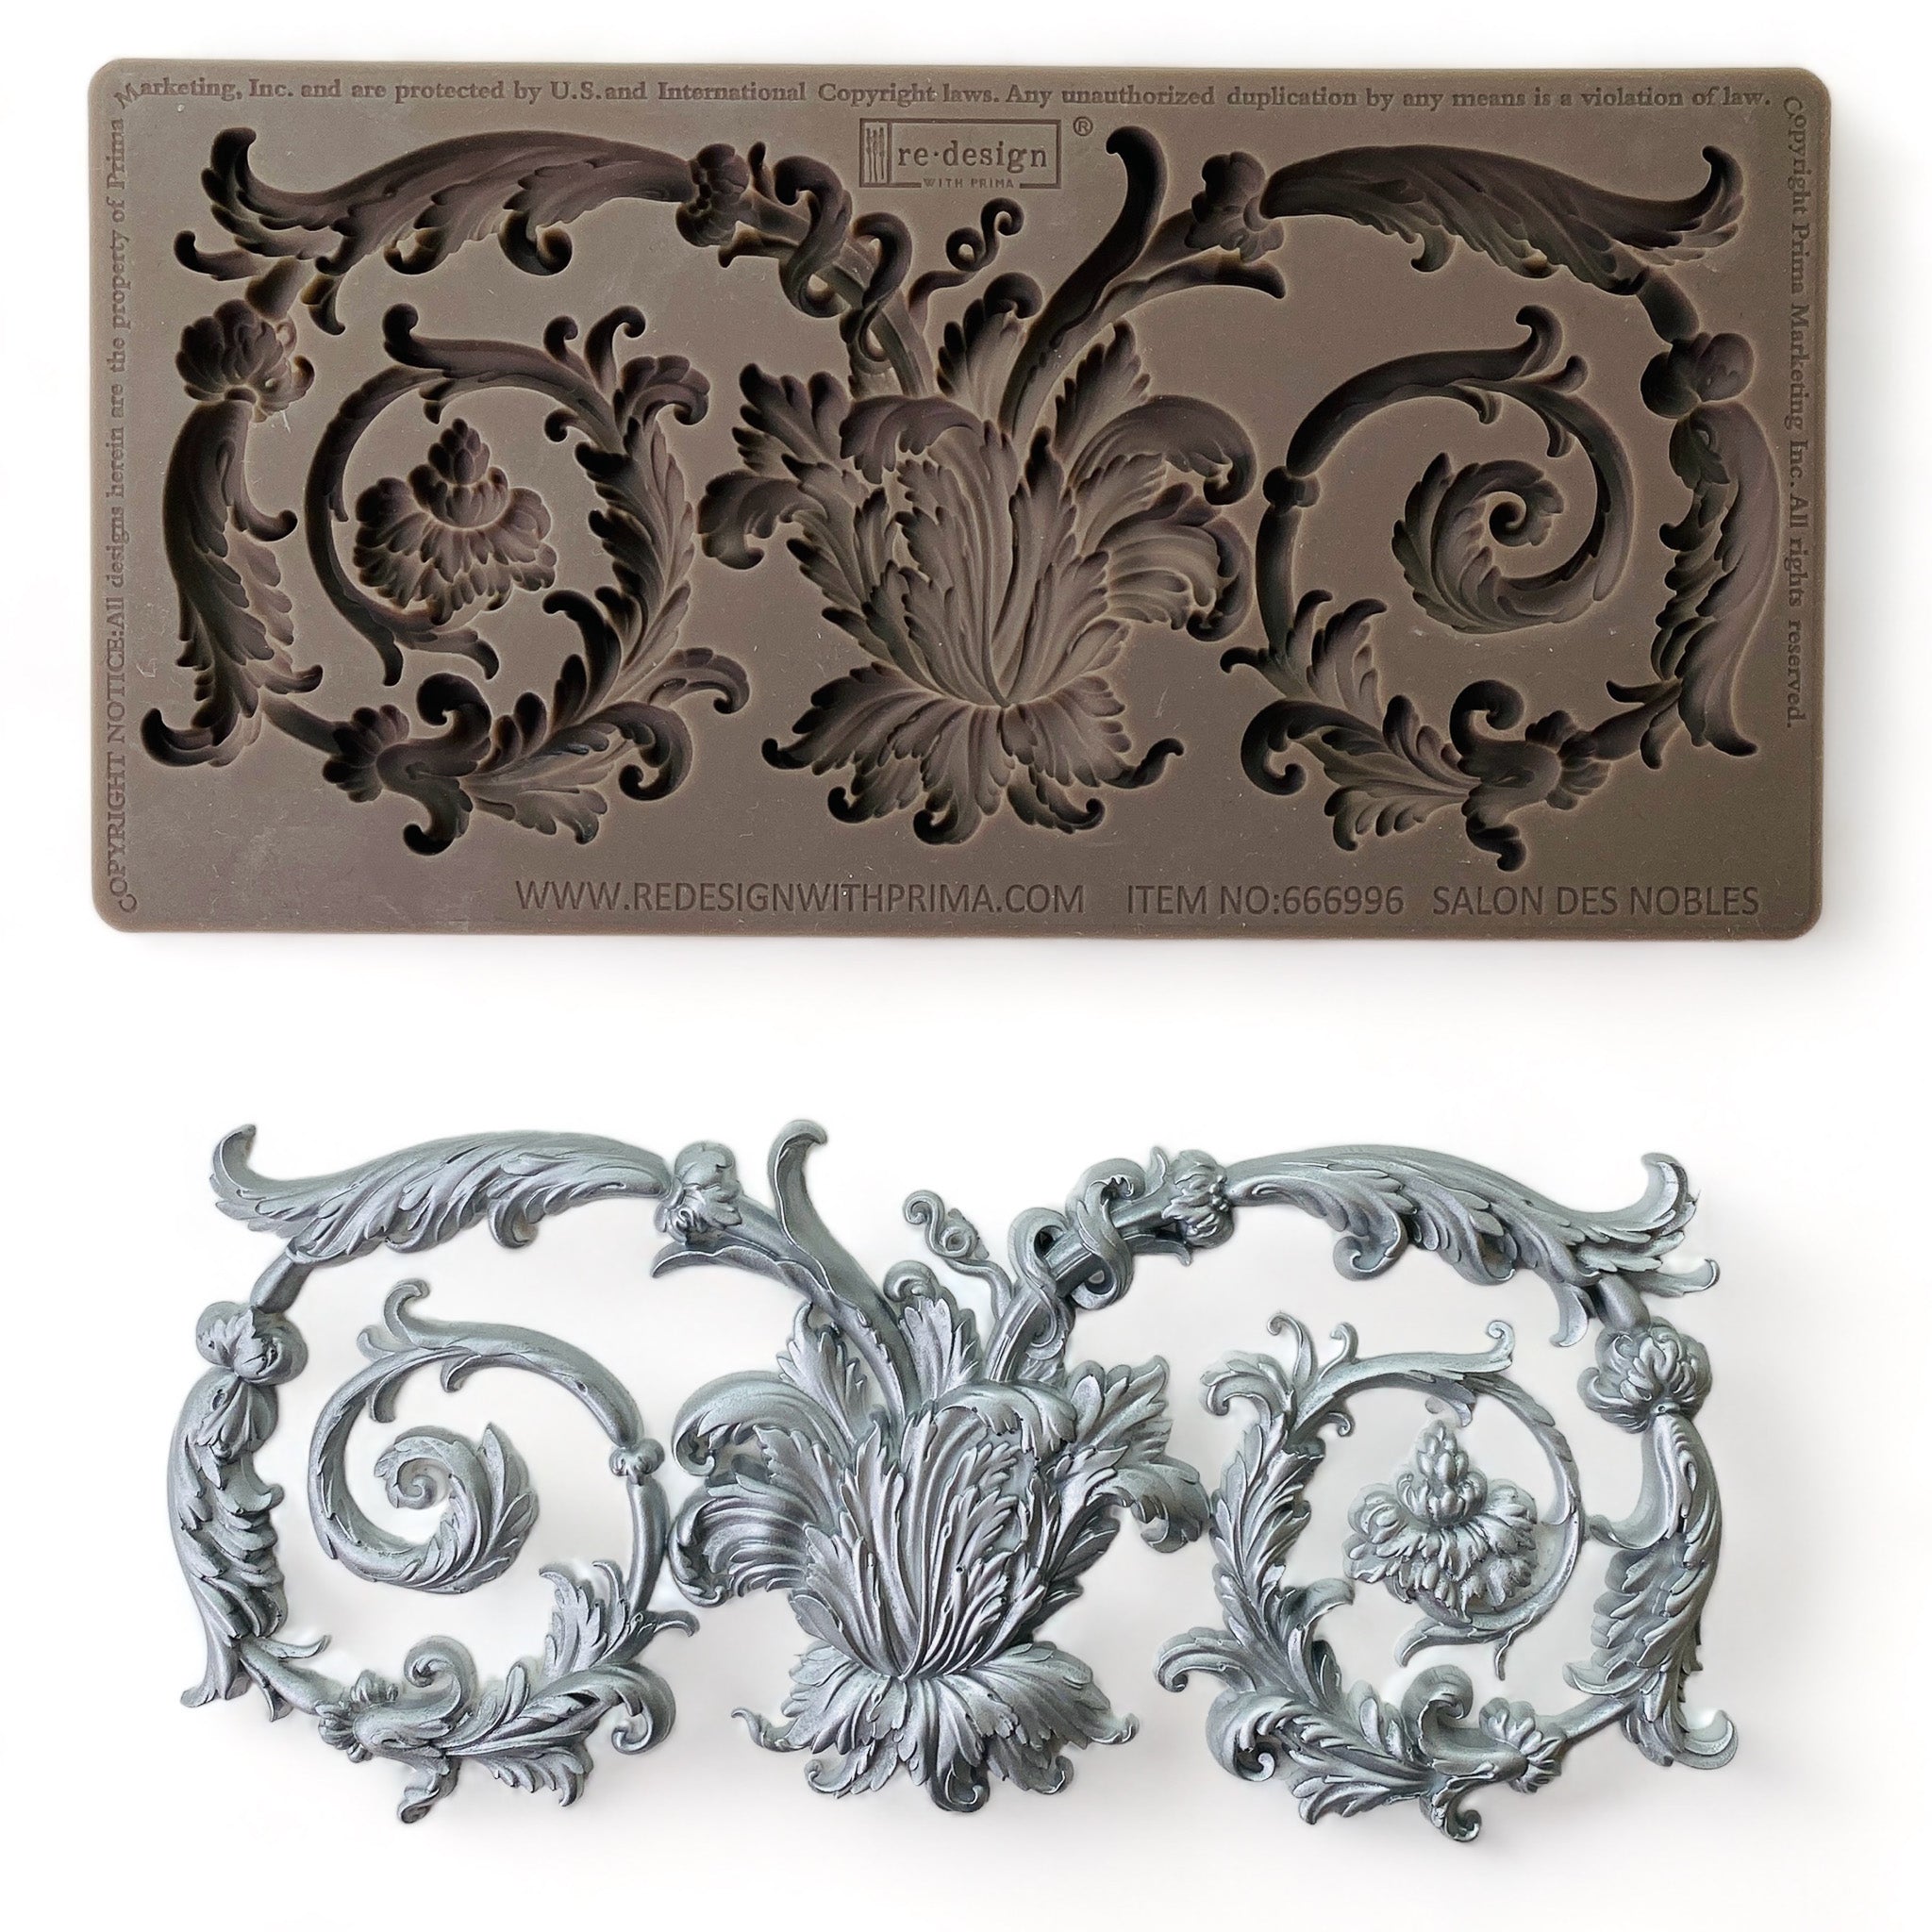 A brown silicone mold and silver-colored casting of a large ornate curling scroll leaf accent piece are against a white background.